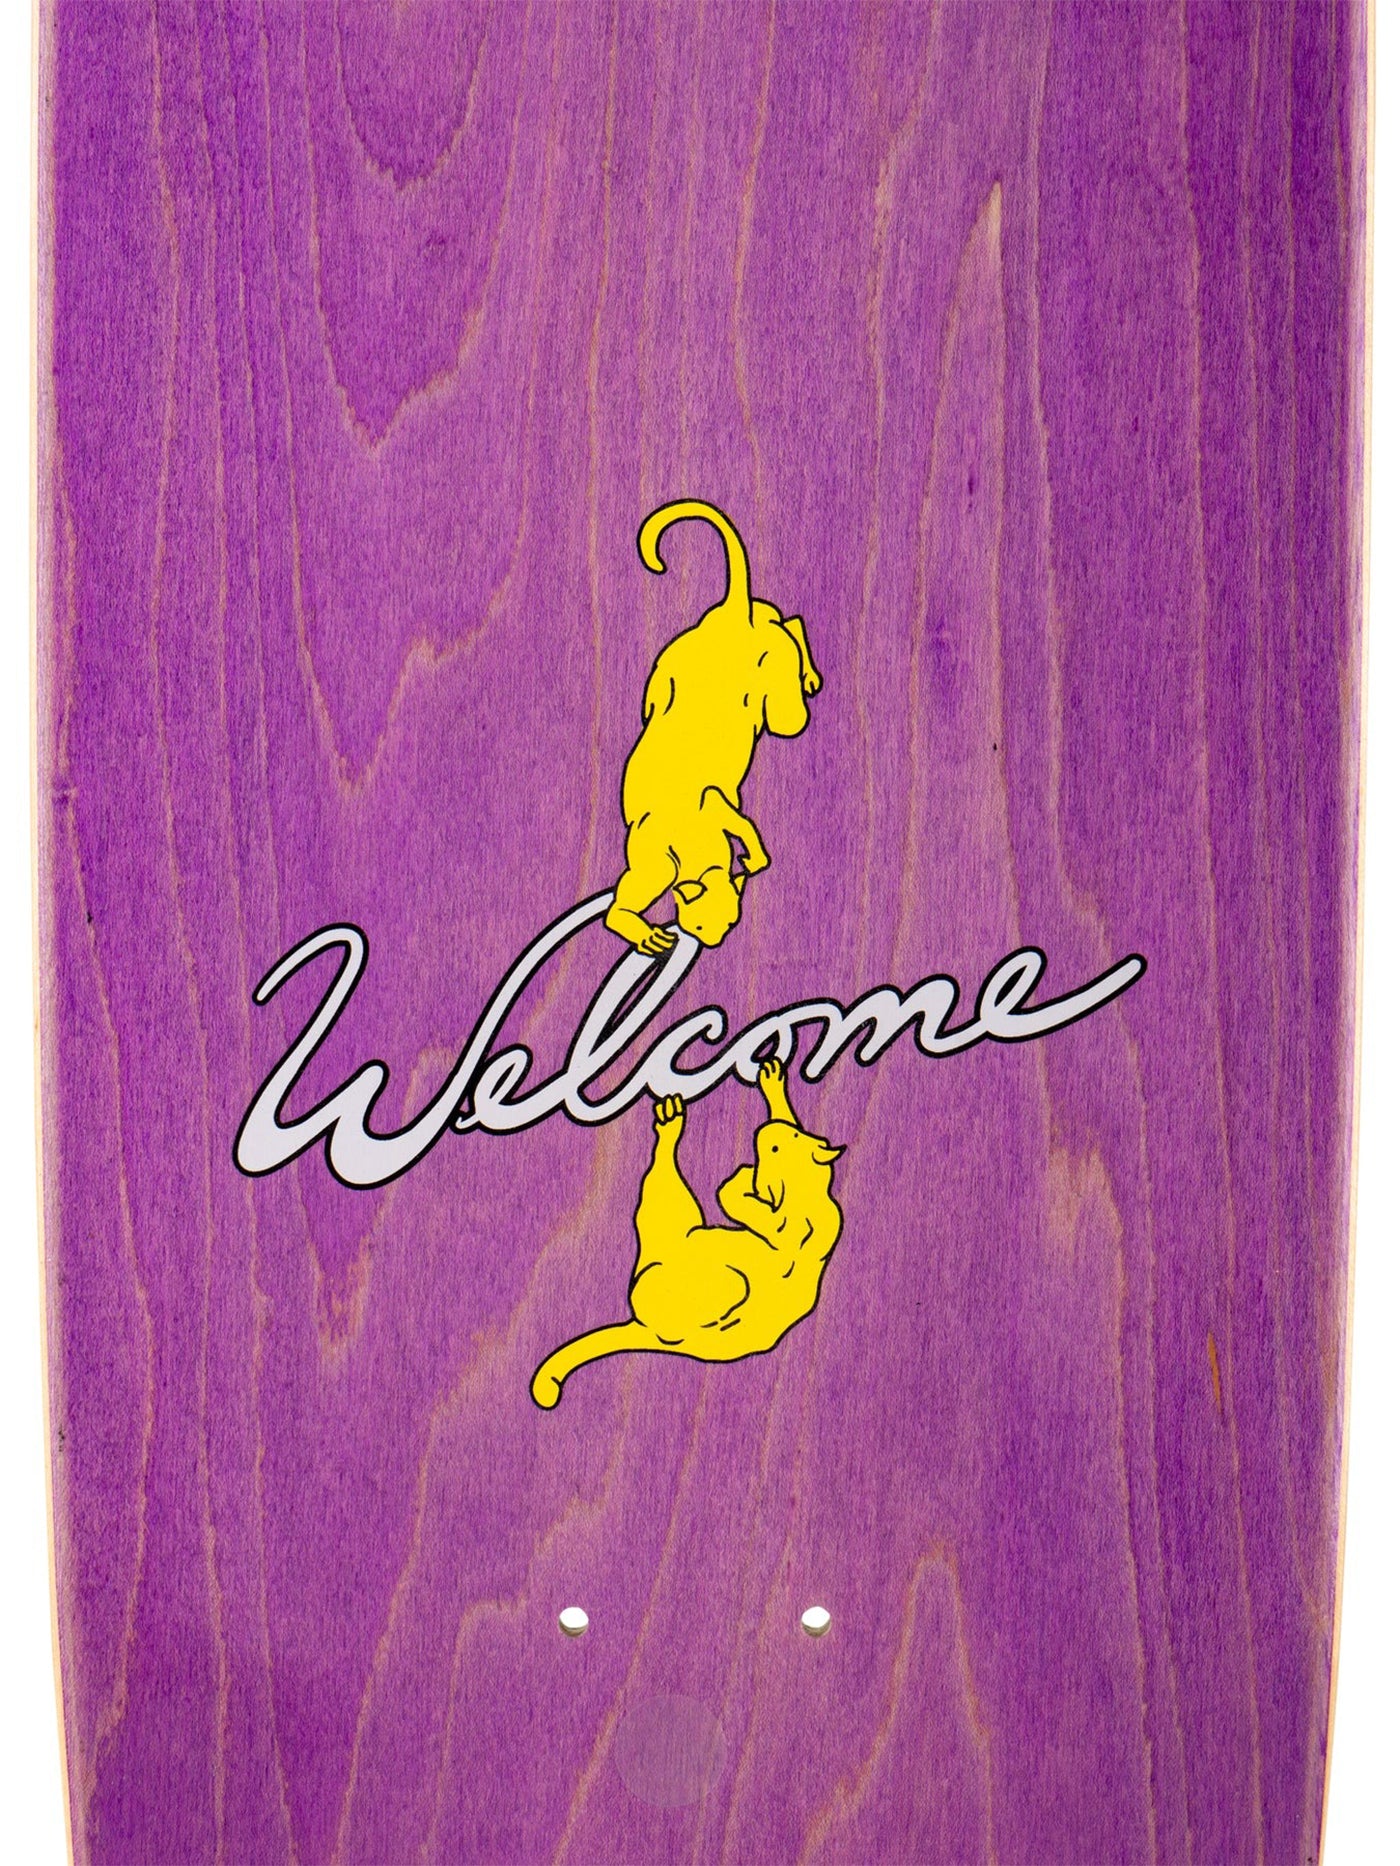 Welcome Vasconcellos Special Effects Sphynx Skateboard Deck